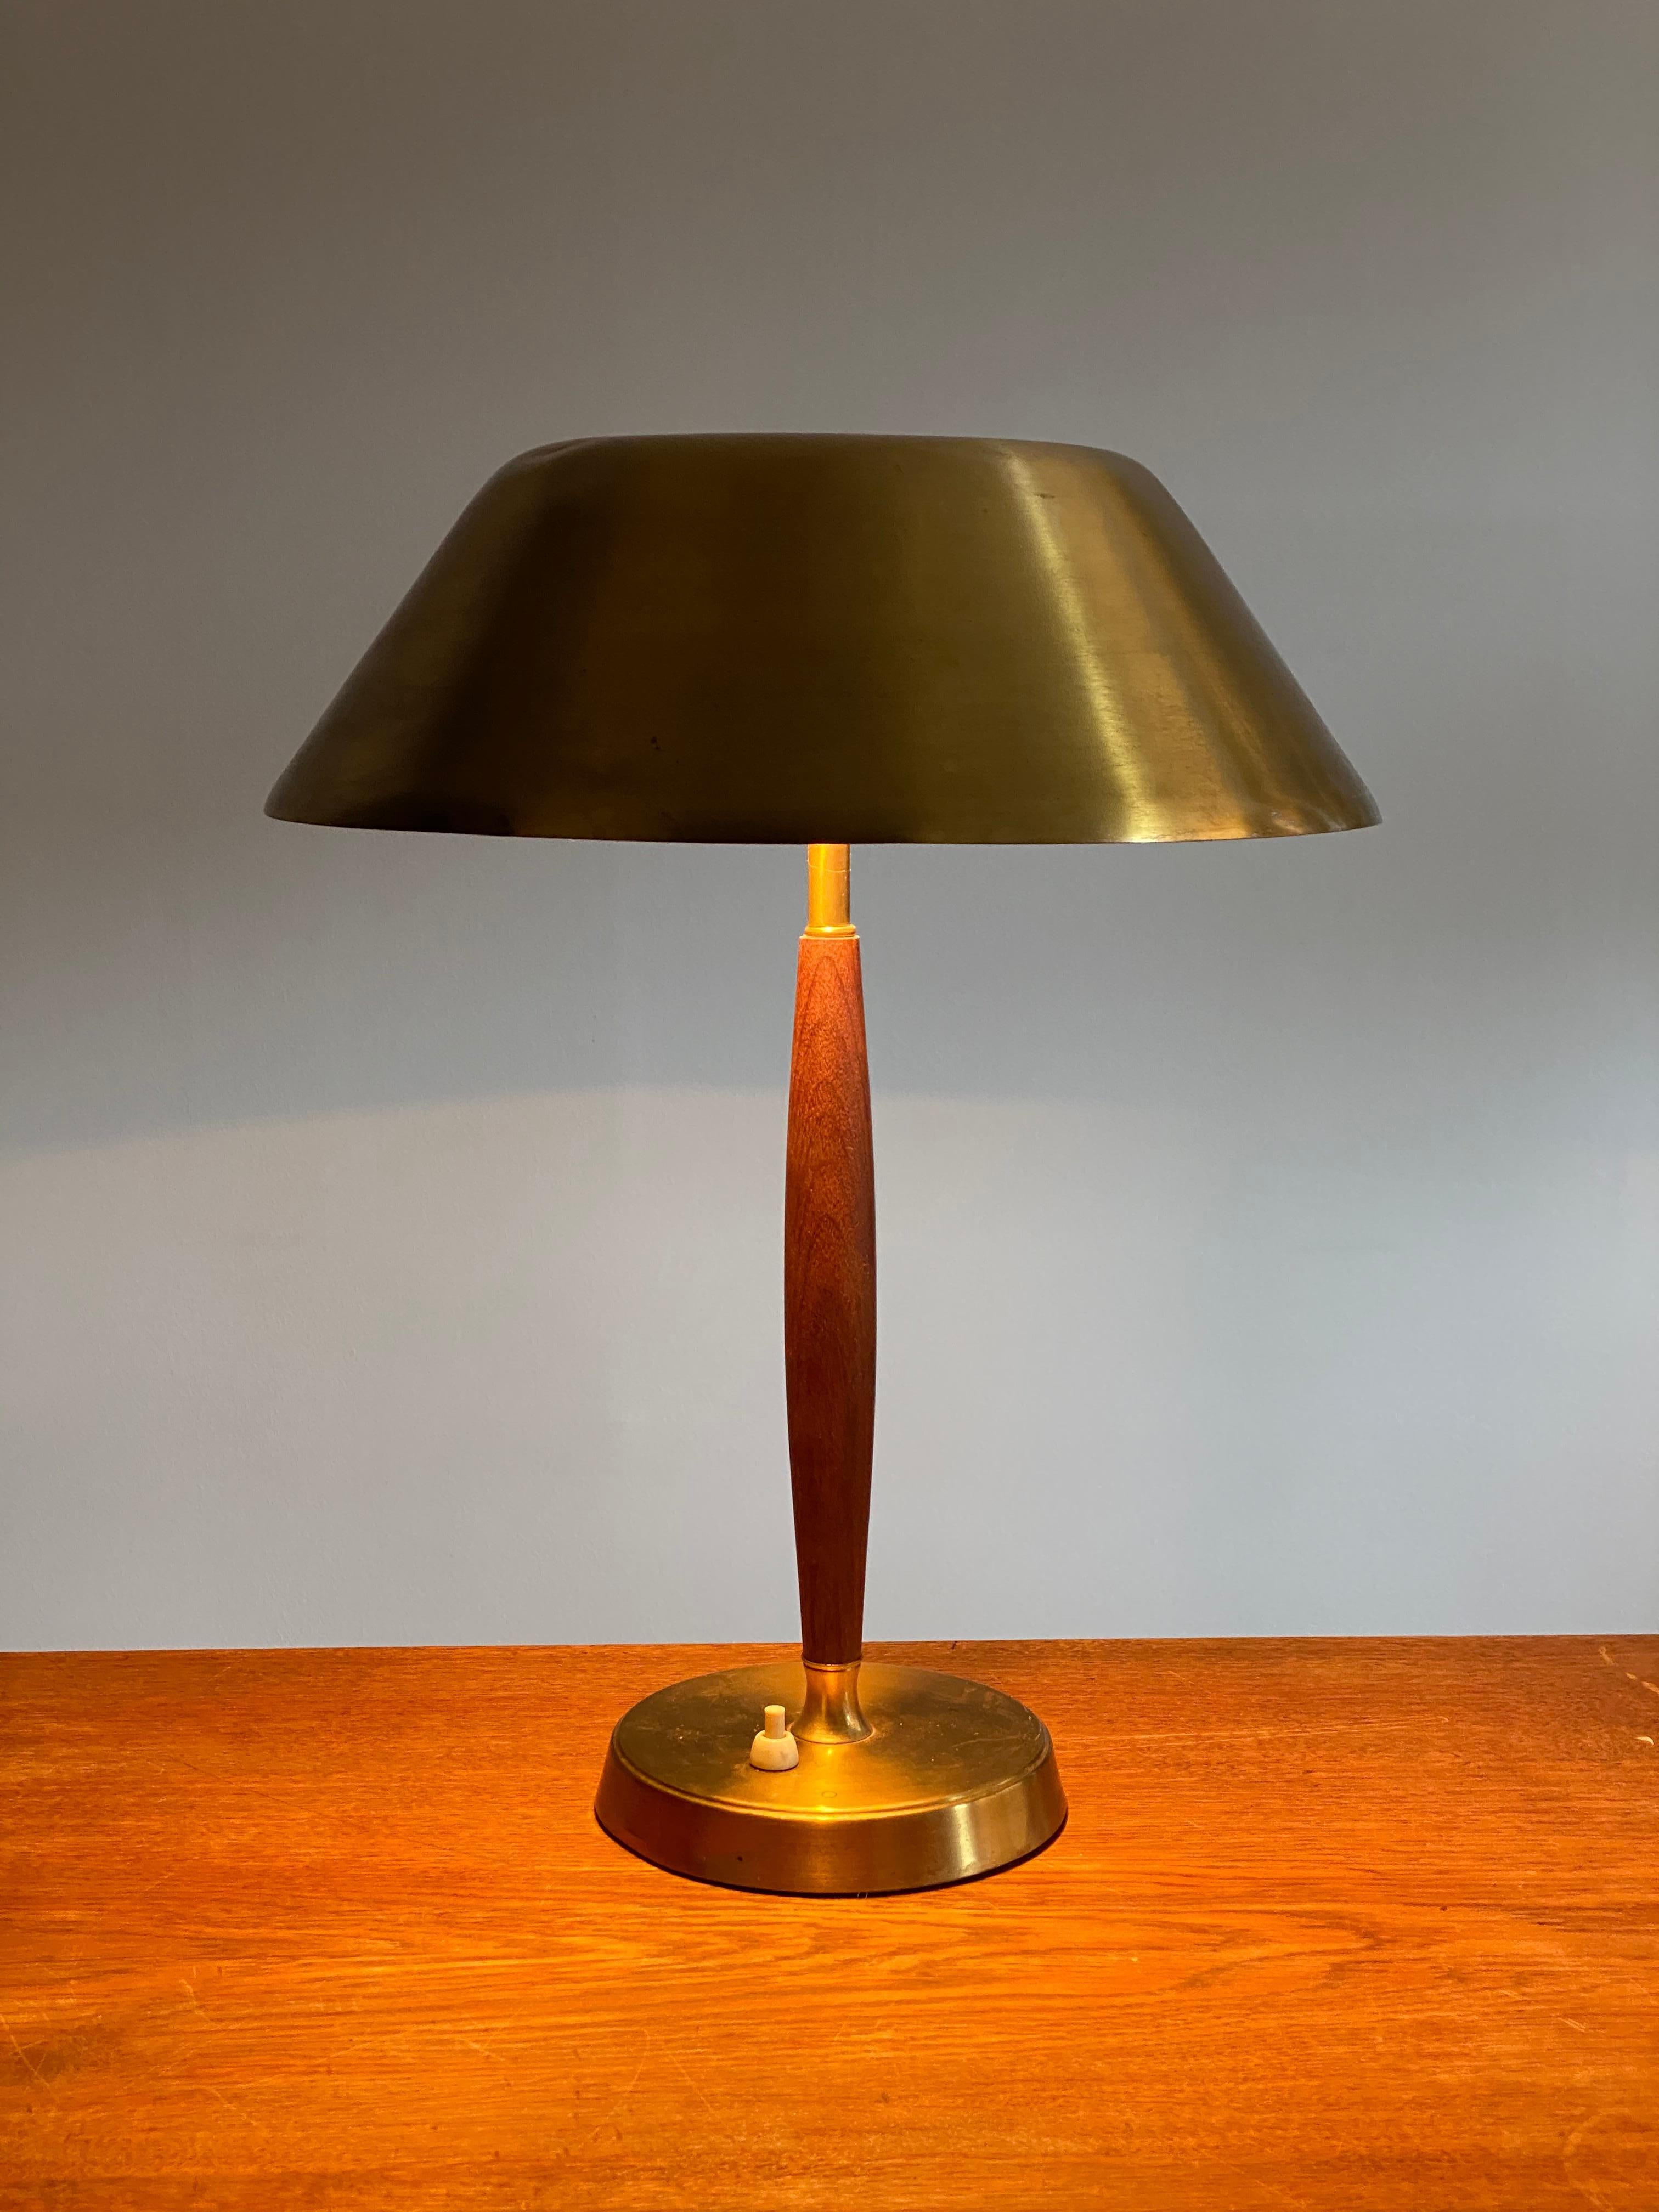 A functionalist table lamp / desk light. Produced by Falkenbergs Belysning. 

Other designers of the period include Hans Bergström, Hans-Agne Jacobson, Alvar Aalto, Josef Frank, and Paavo Tynell.